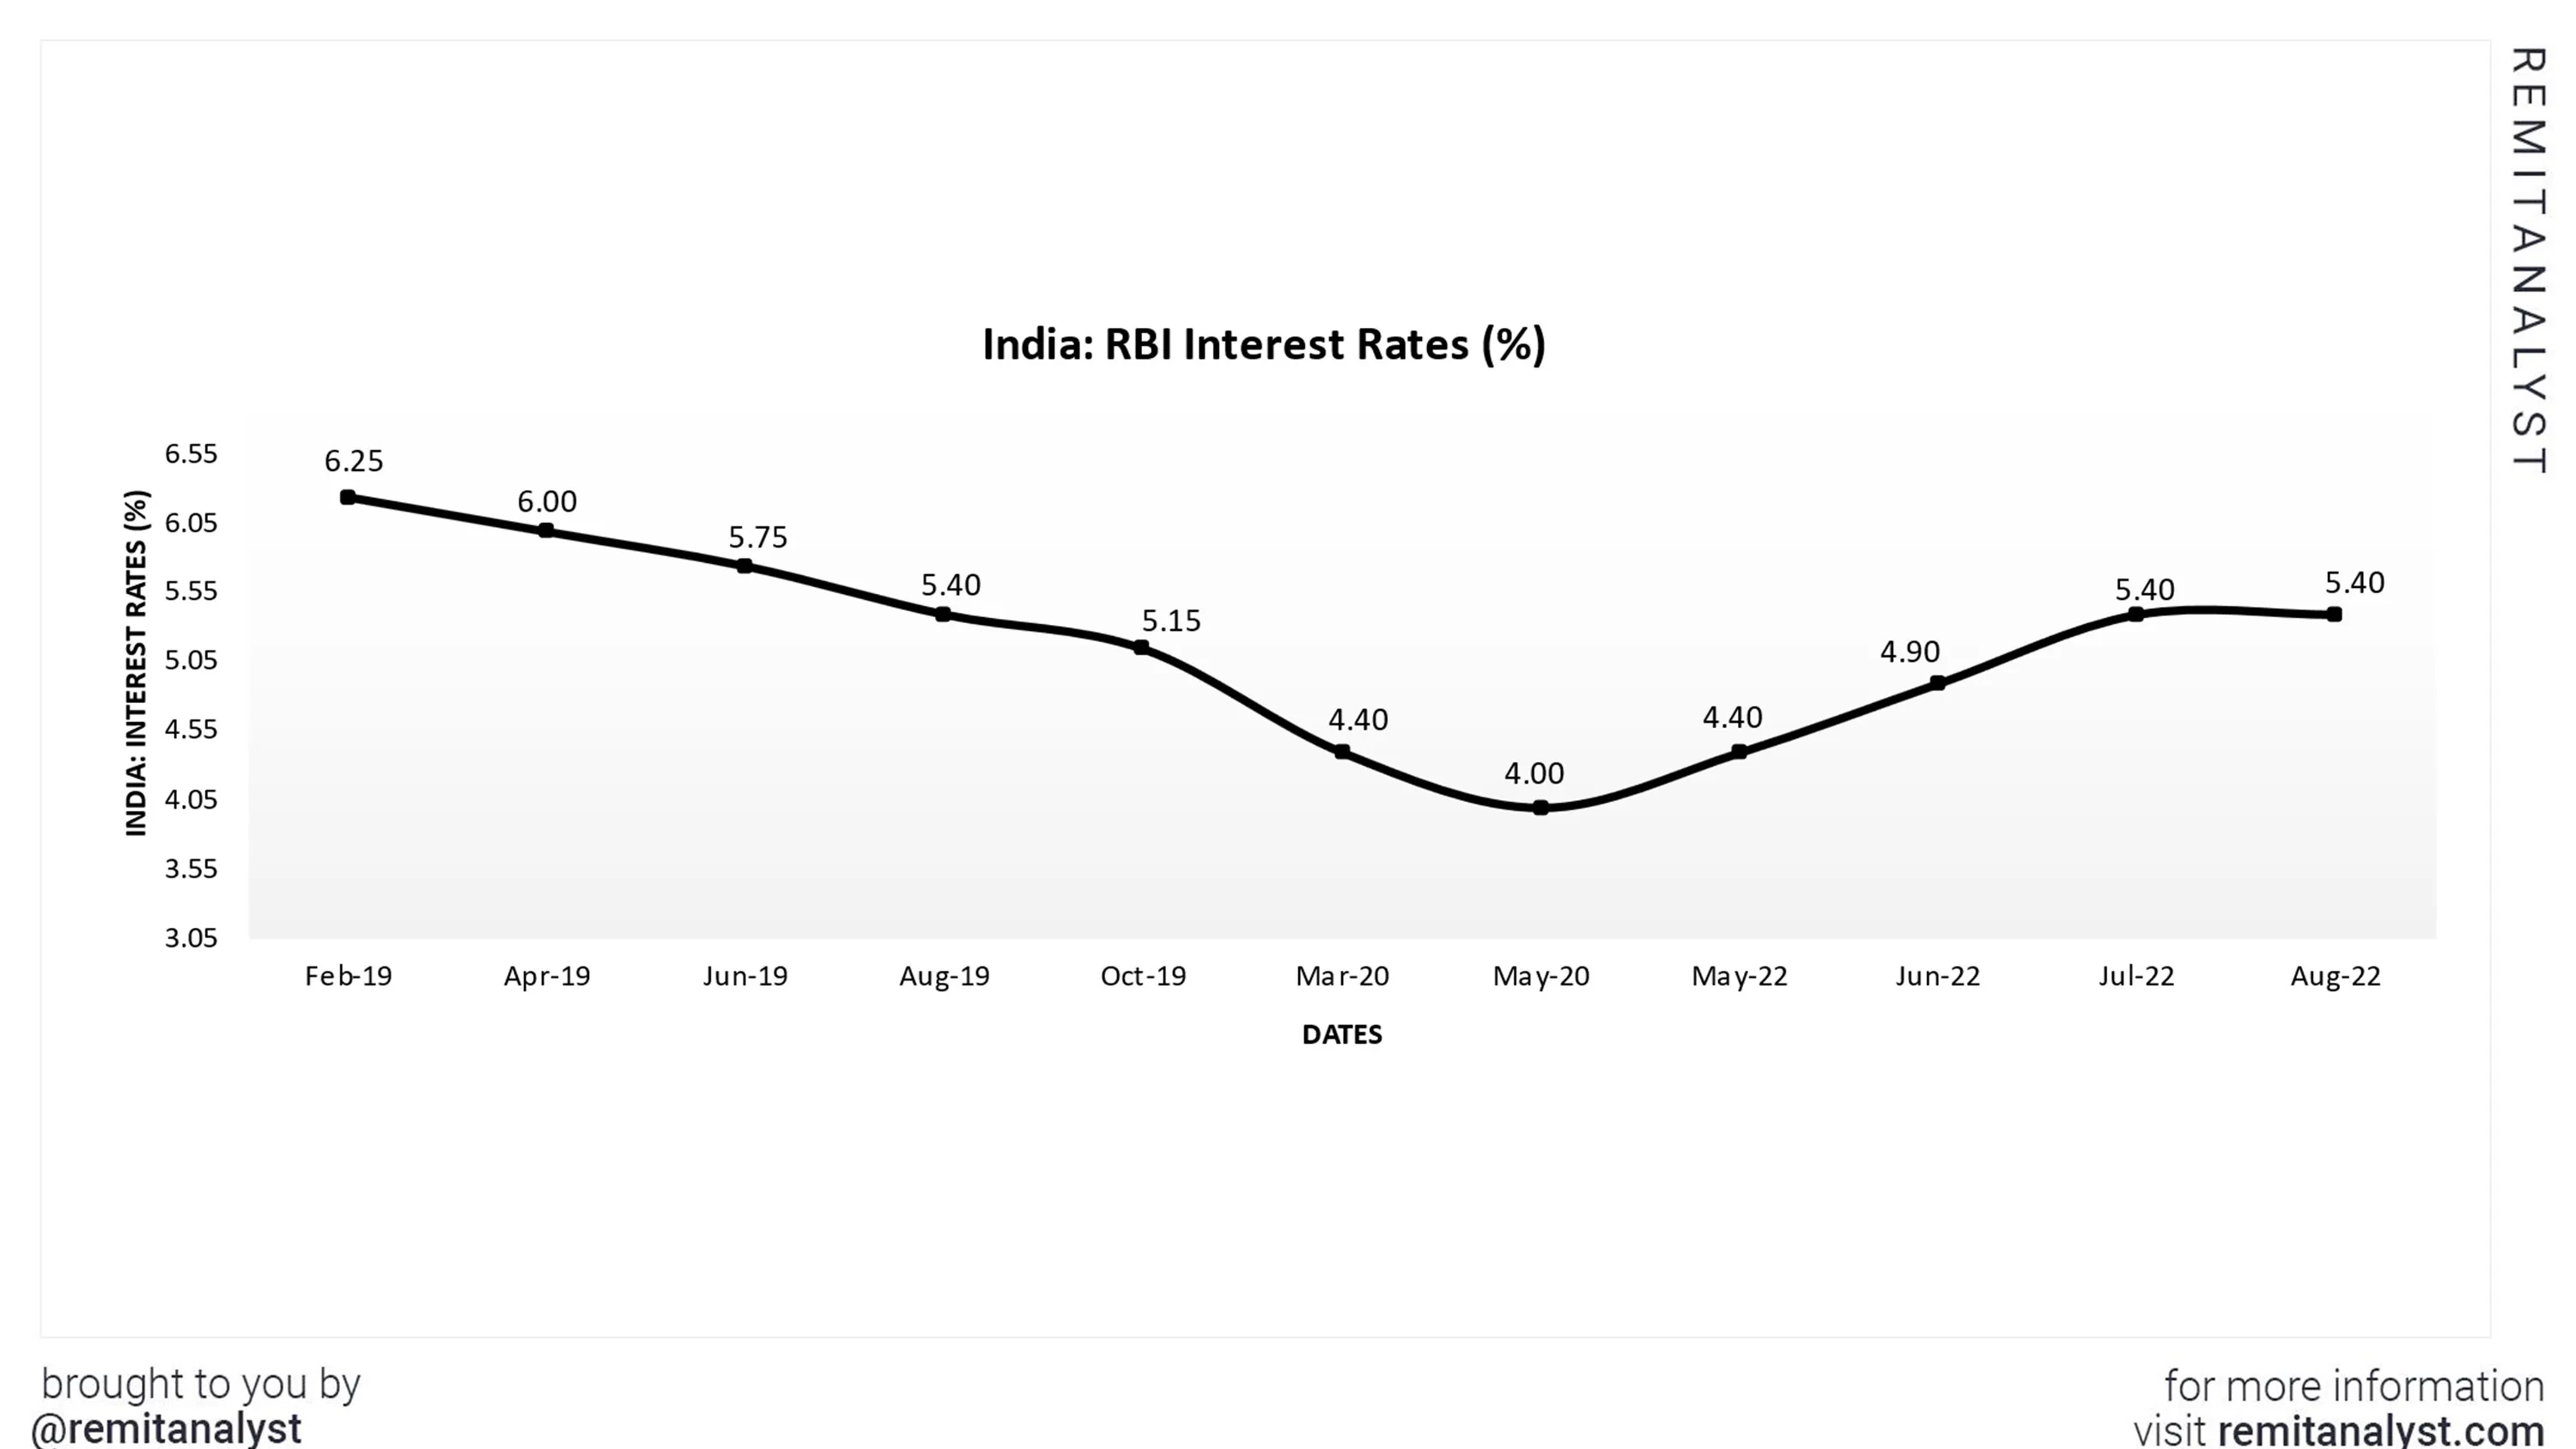 interest-rates-india-from-feb-2019-to-aug-2022